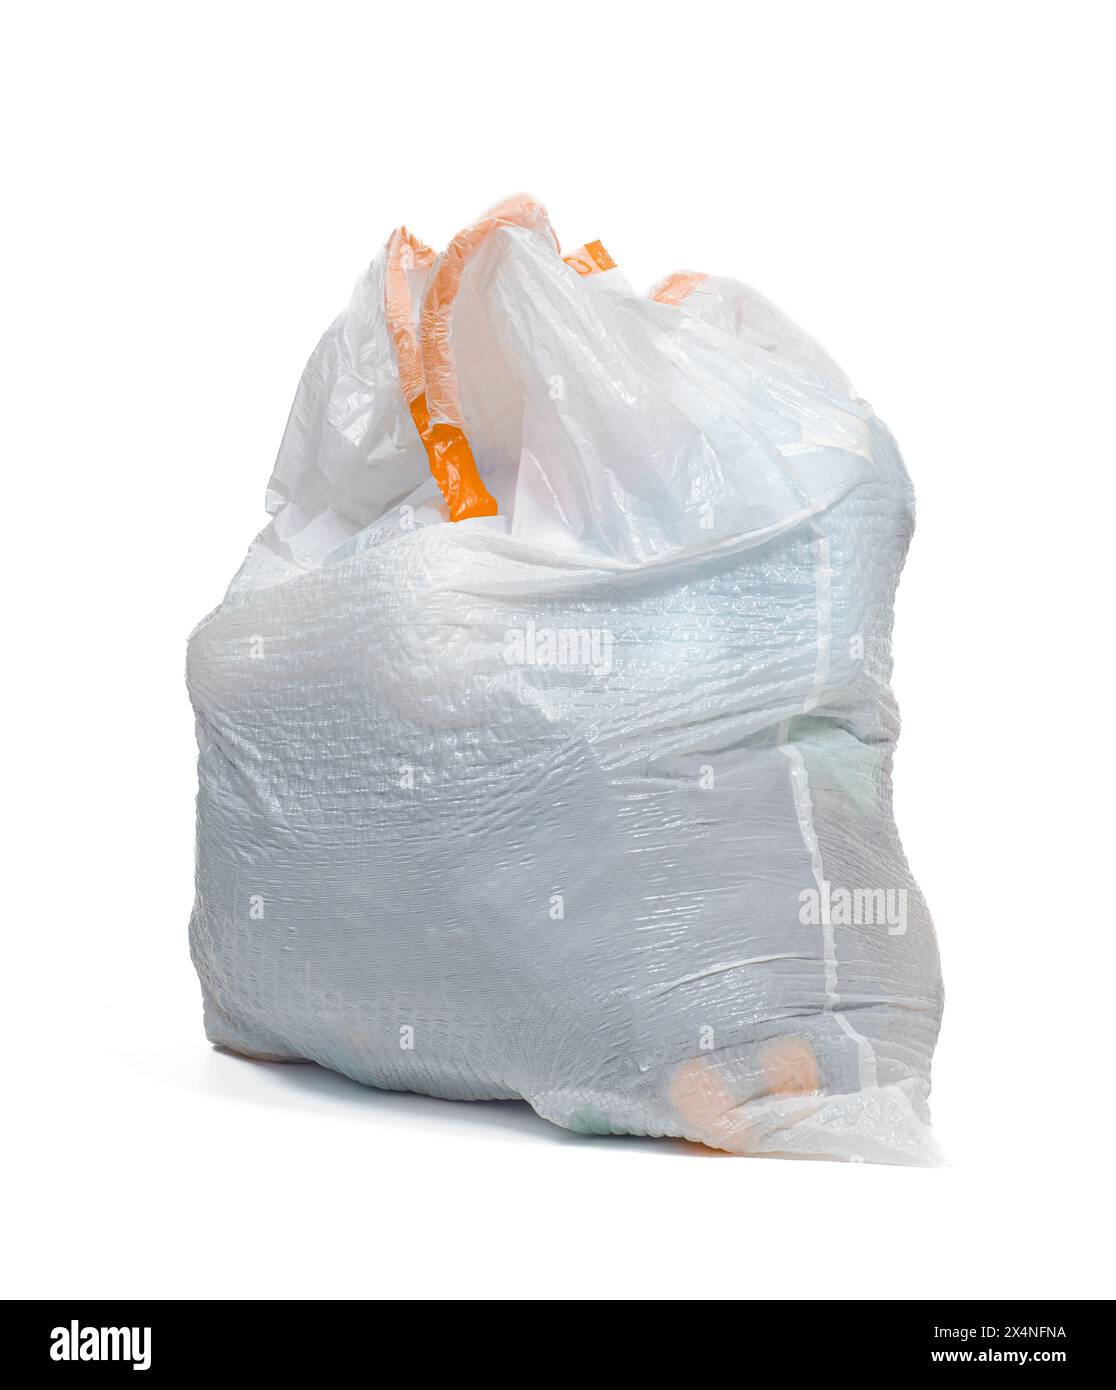 Vertical close-up shot of a full white trash bag on a white background with copy space. Stock Photo